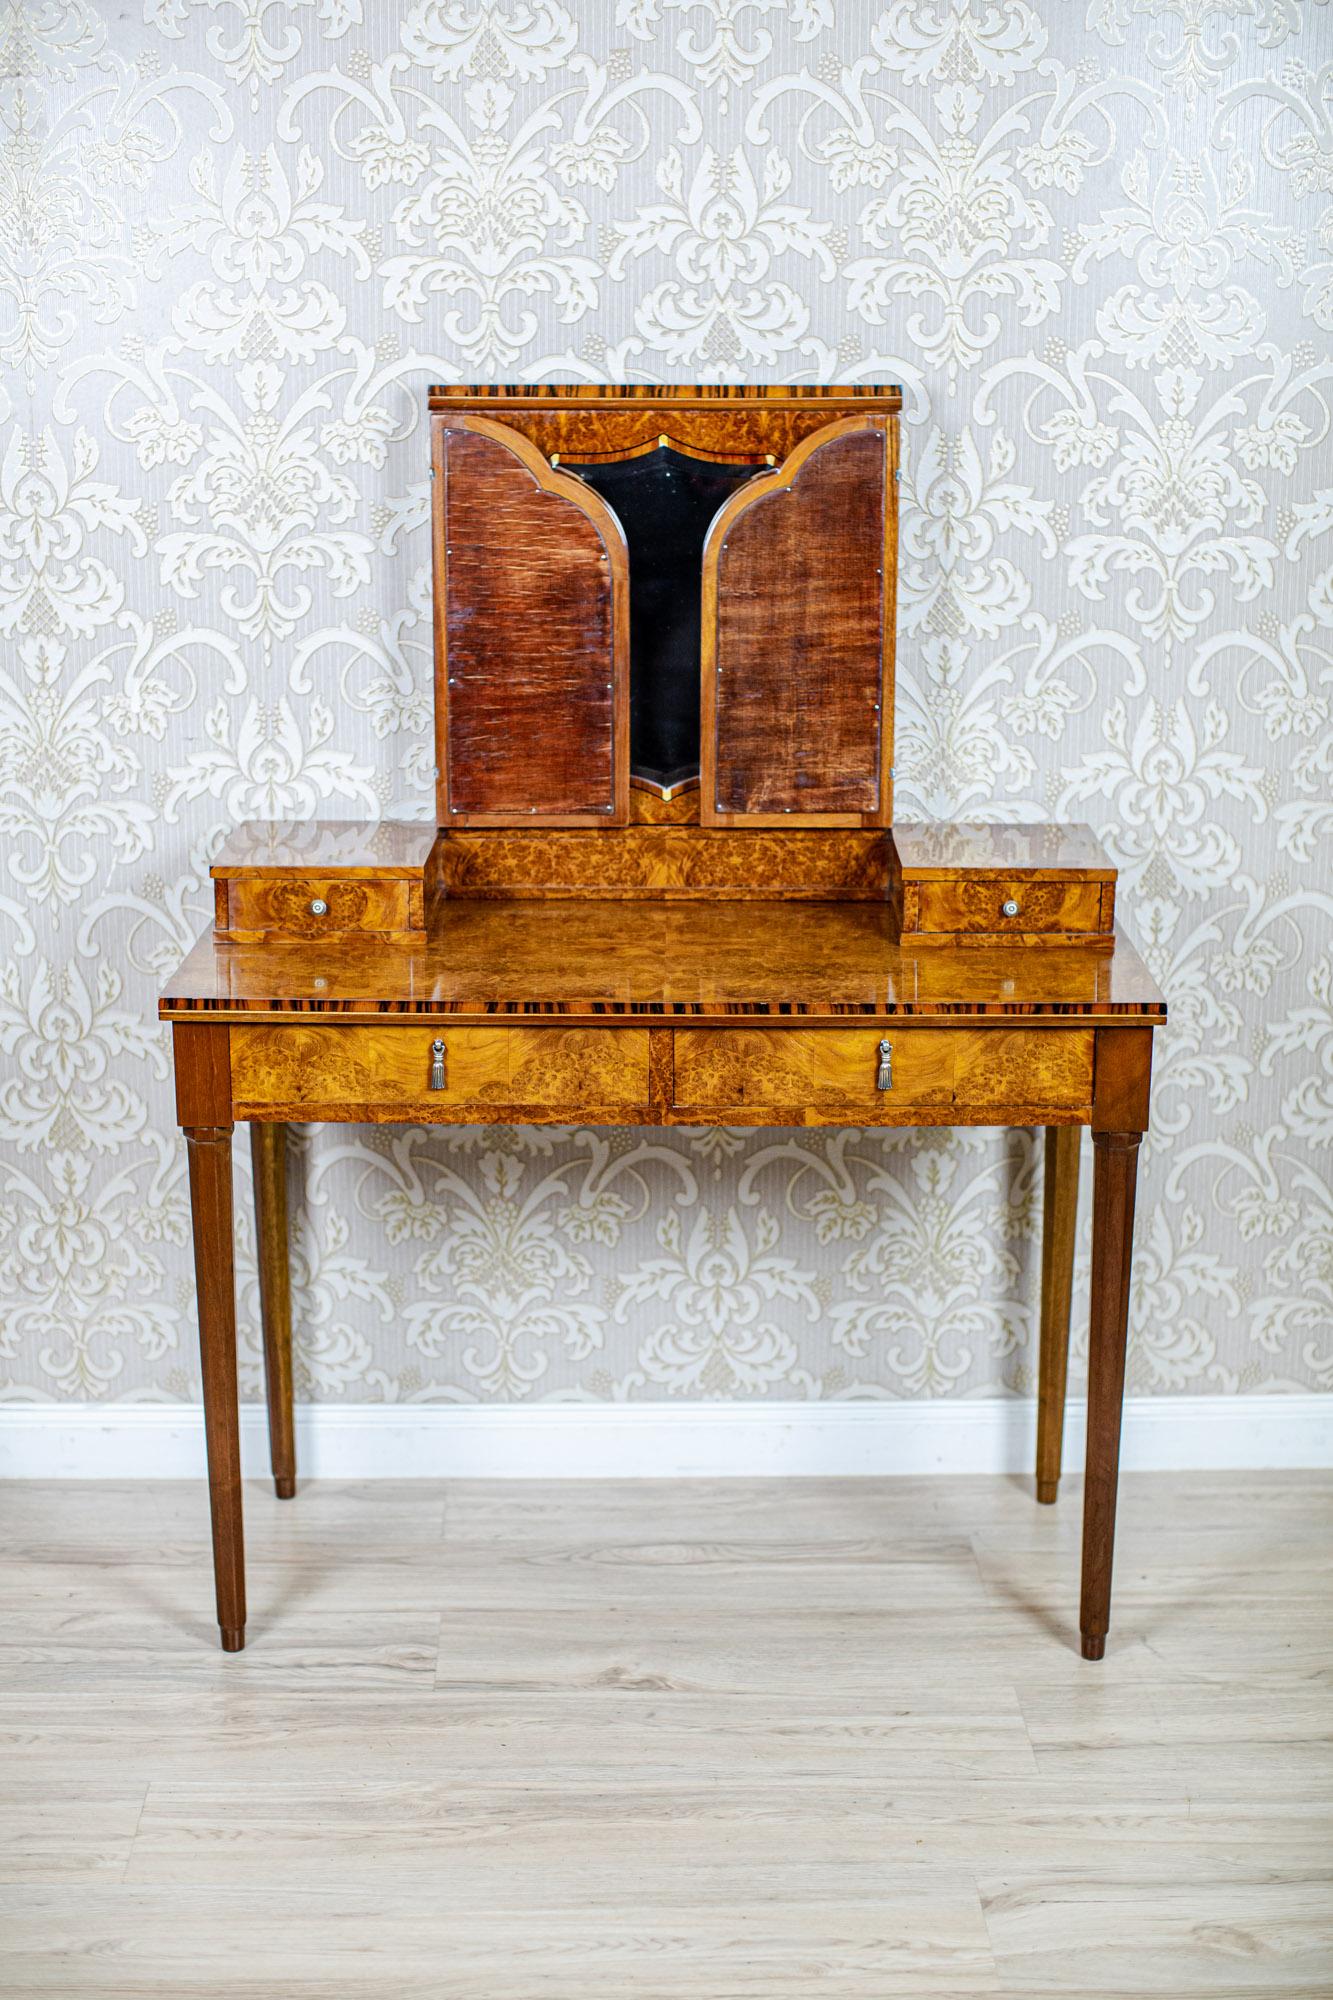 Lady's Vanity Table From the Early 20th Century

An Art Deco piece of furniture on high, straight legs, with drawers in the corpus.
The add-on unit is composed of an inlaid frame with a mirror, which is flanked by two smaller mirrors.
The whole is